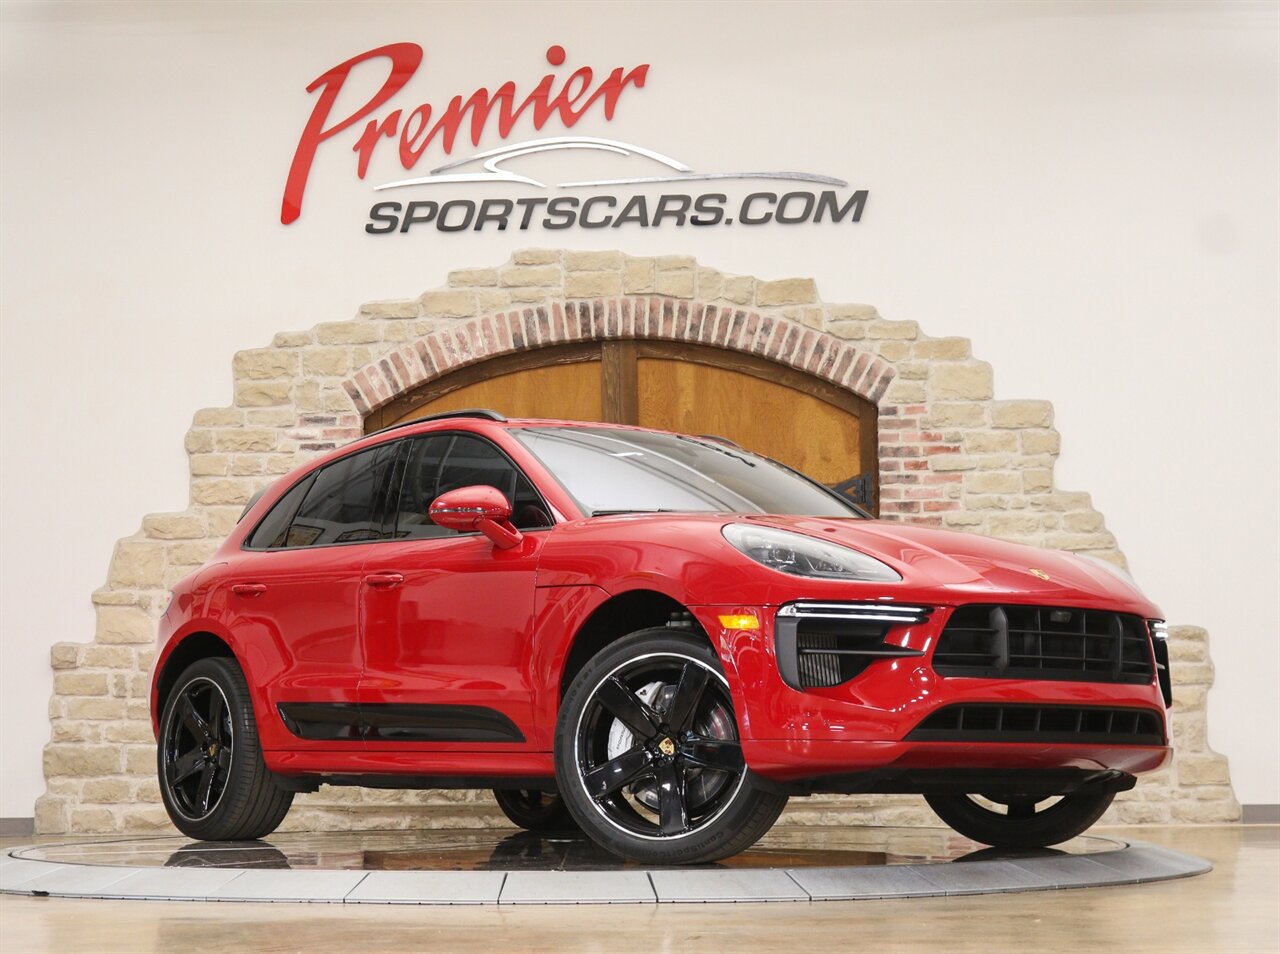 2020 Porsche Macan Turbo  (Lots of options MSRP $124,740) - Photo 5 - Springfield, MO 65802